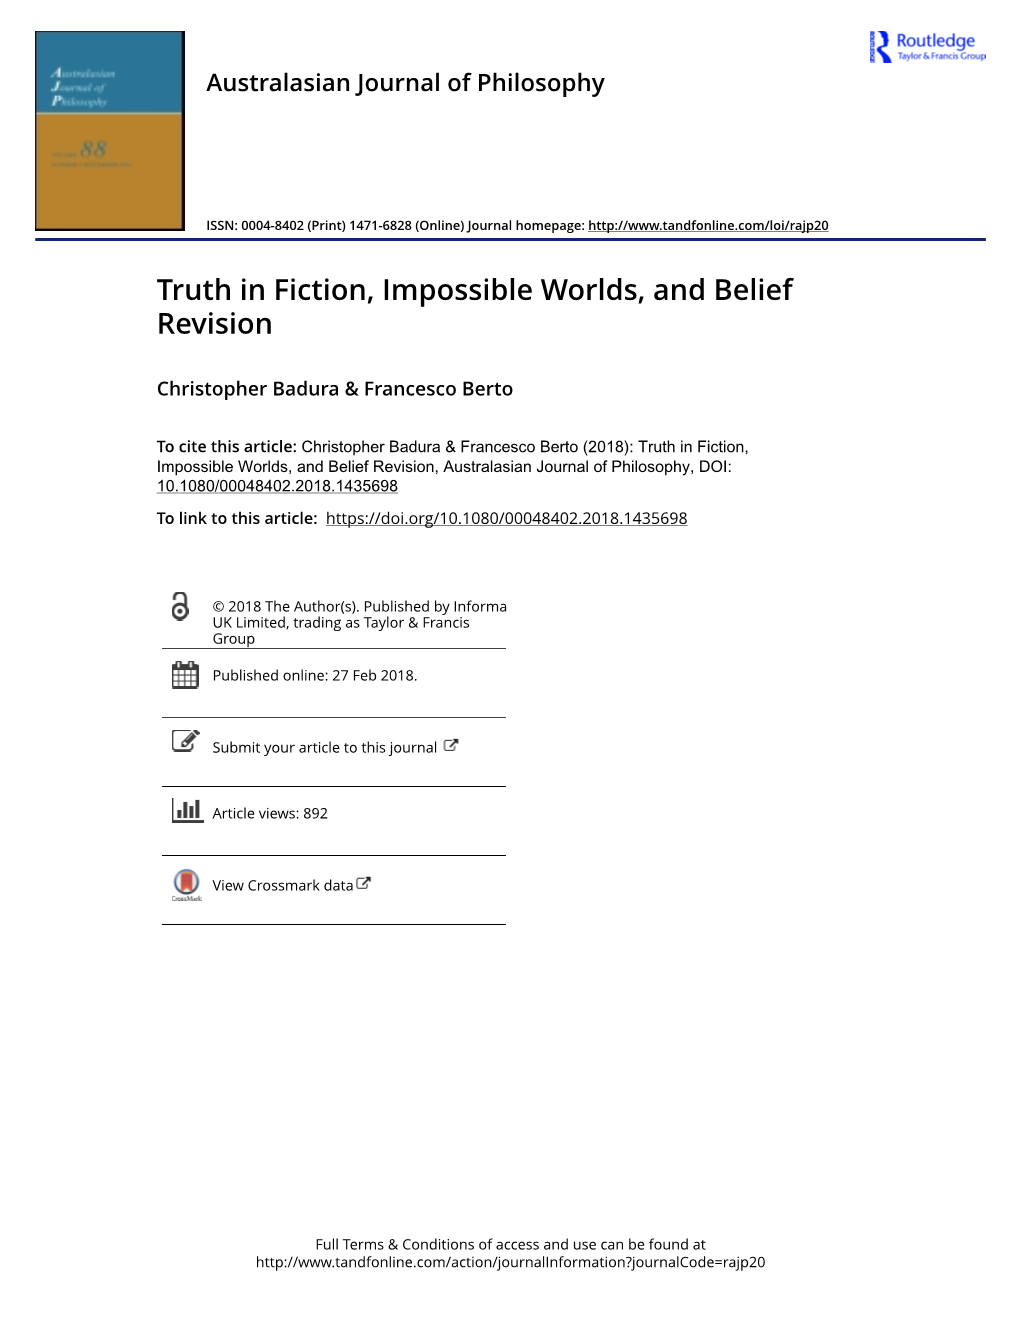 Truth in Fiction, Impossible Worlds, and Belief Revision